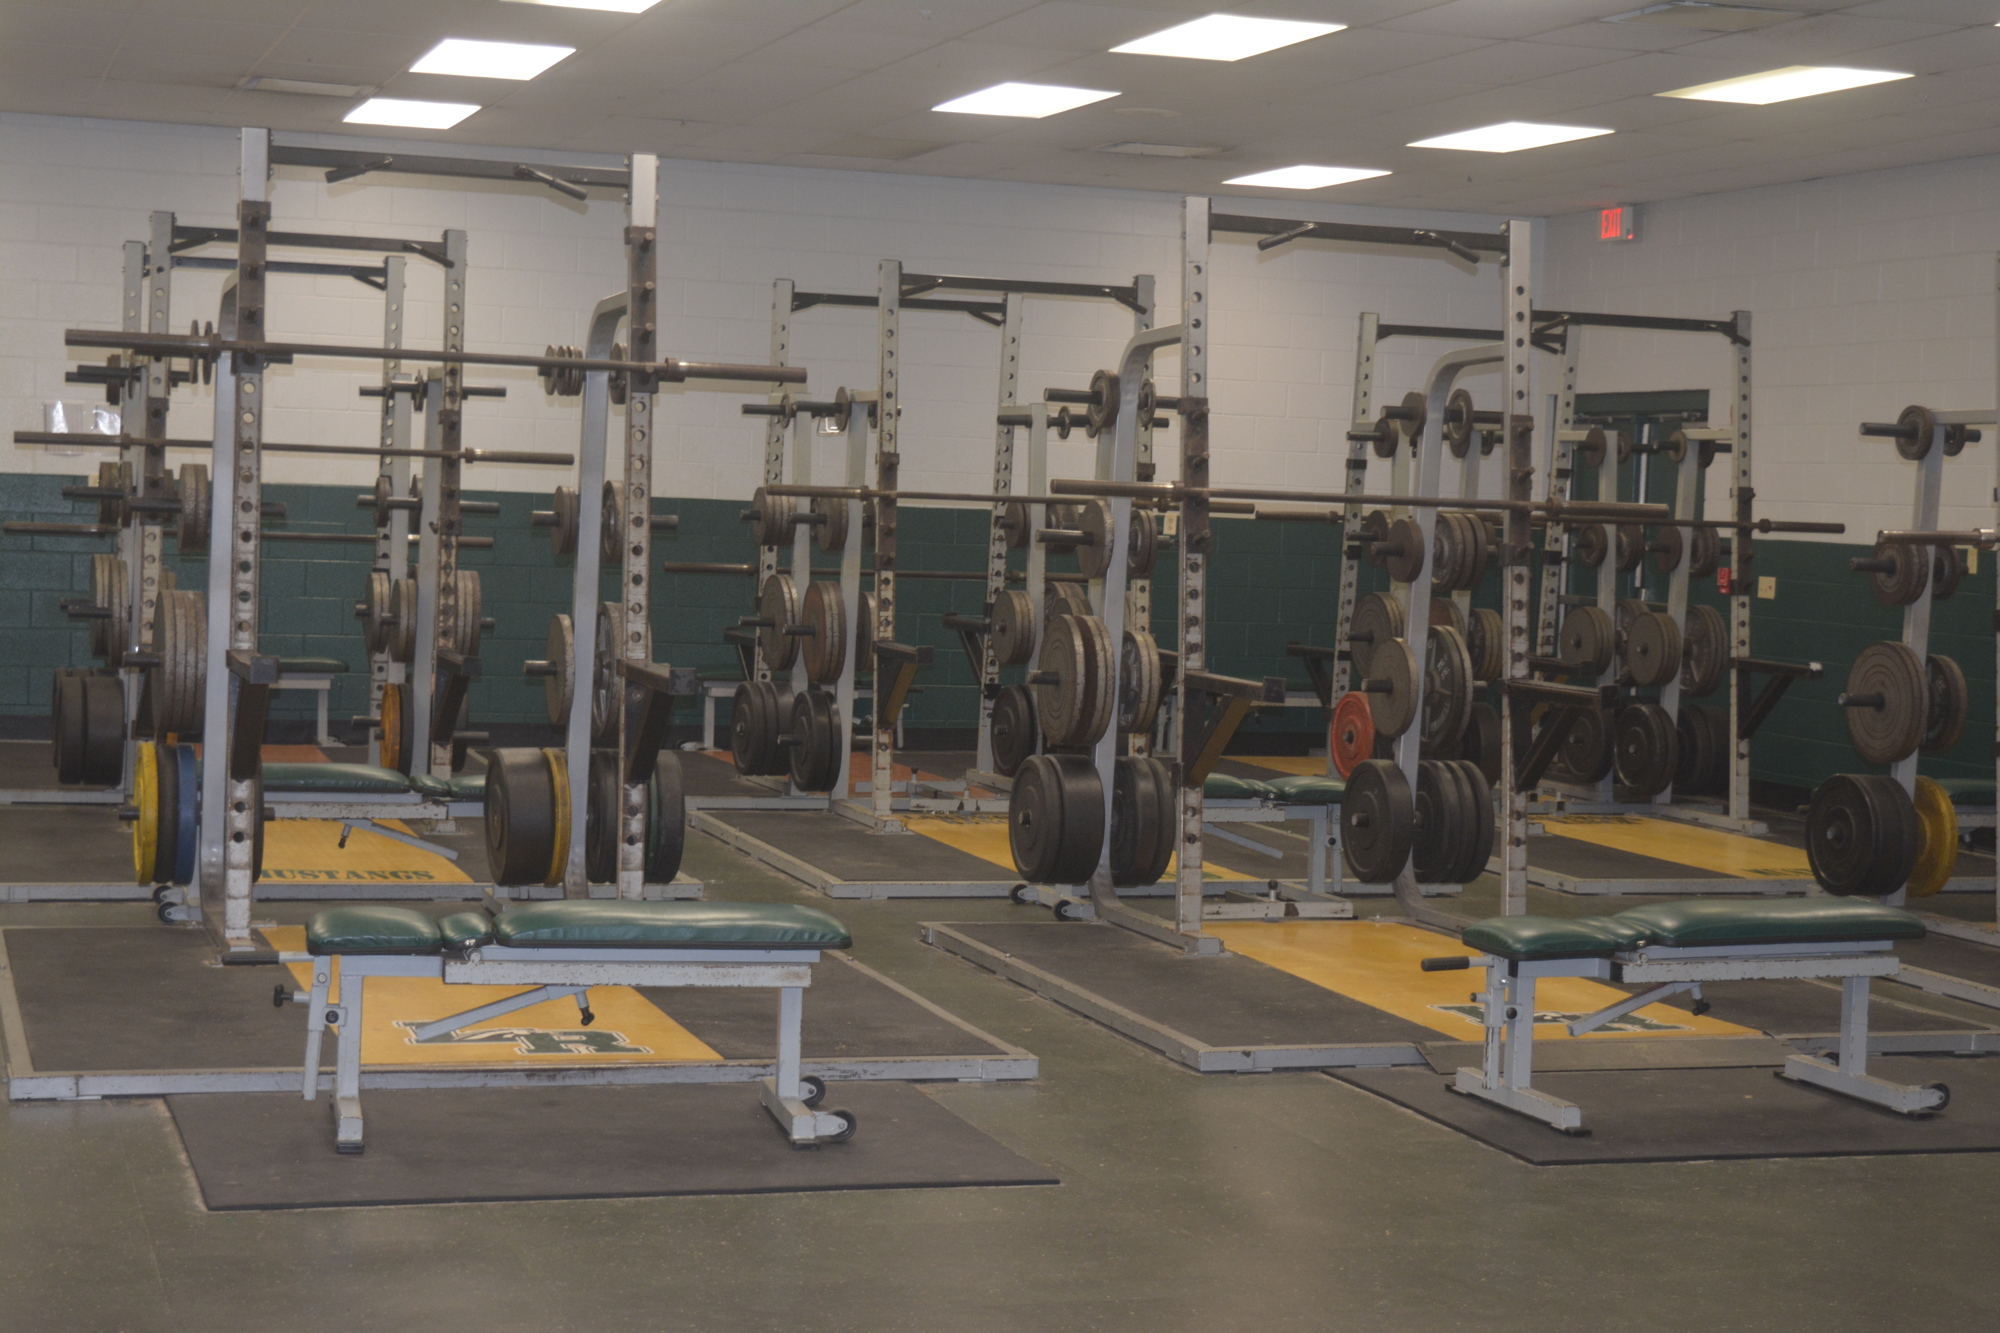 The 15 single-use weight cages at Lakewood Ranch High, which stand on raised platforms, will be replaced with eight twin-use cages that stand directly on the floor, allowing for more users, safer traversal of the room and more space for other activities.